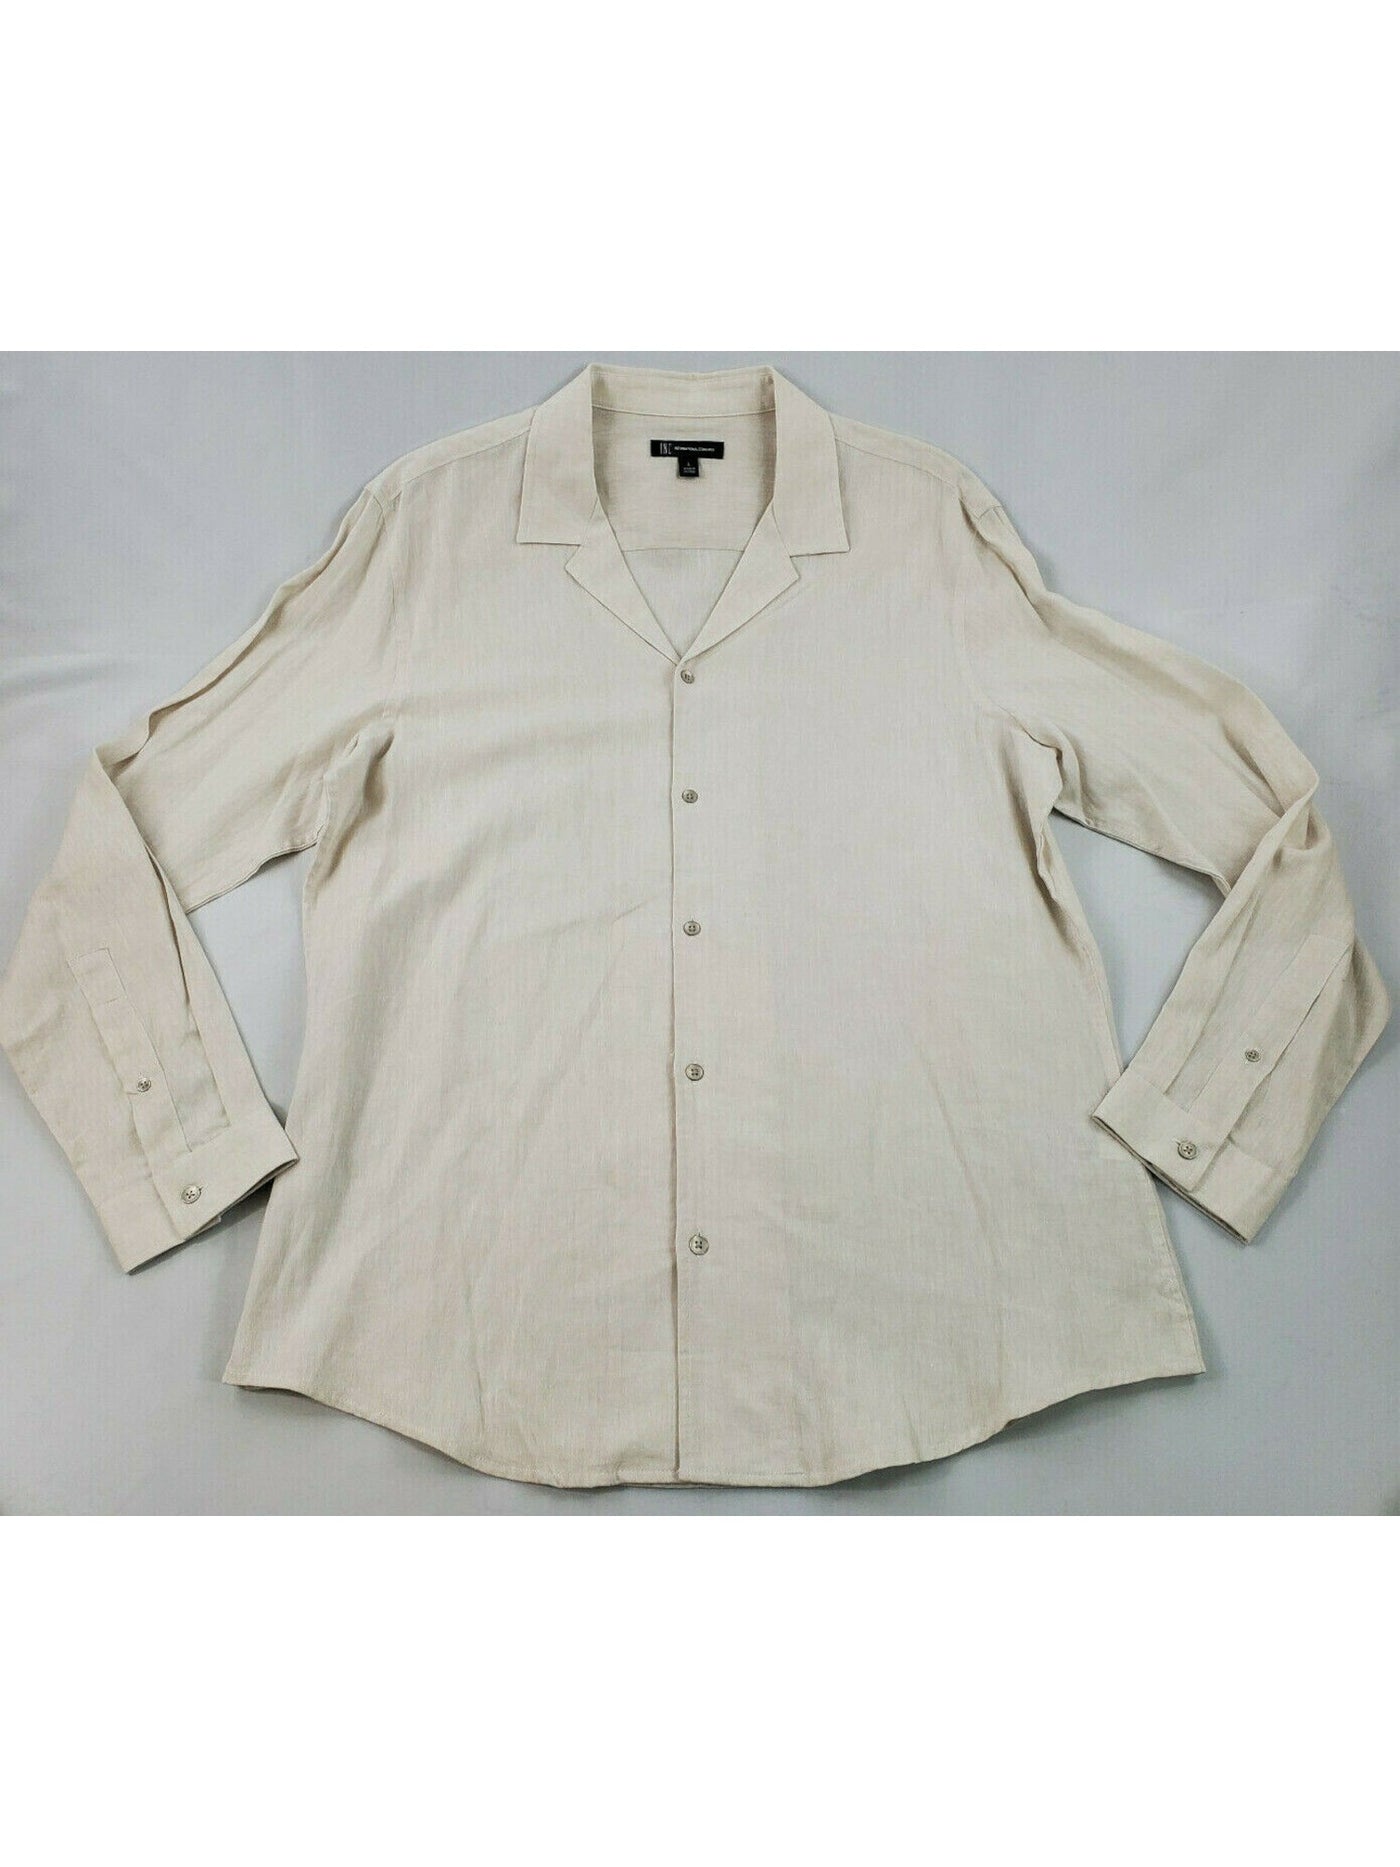 INC Mens Ivory Collared Classic Fit Button Down Shirt L